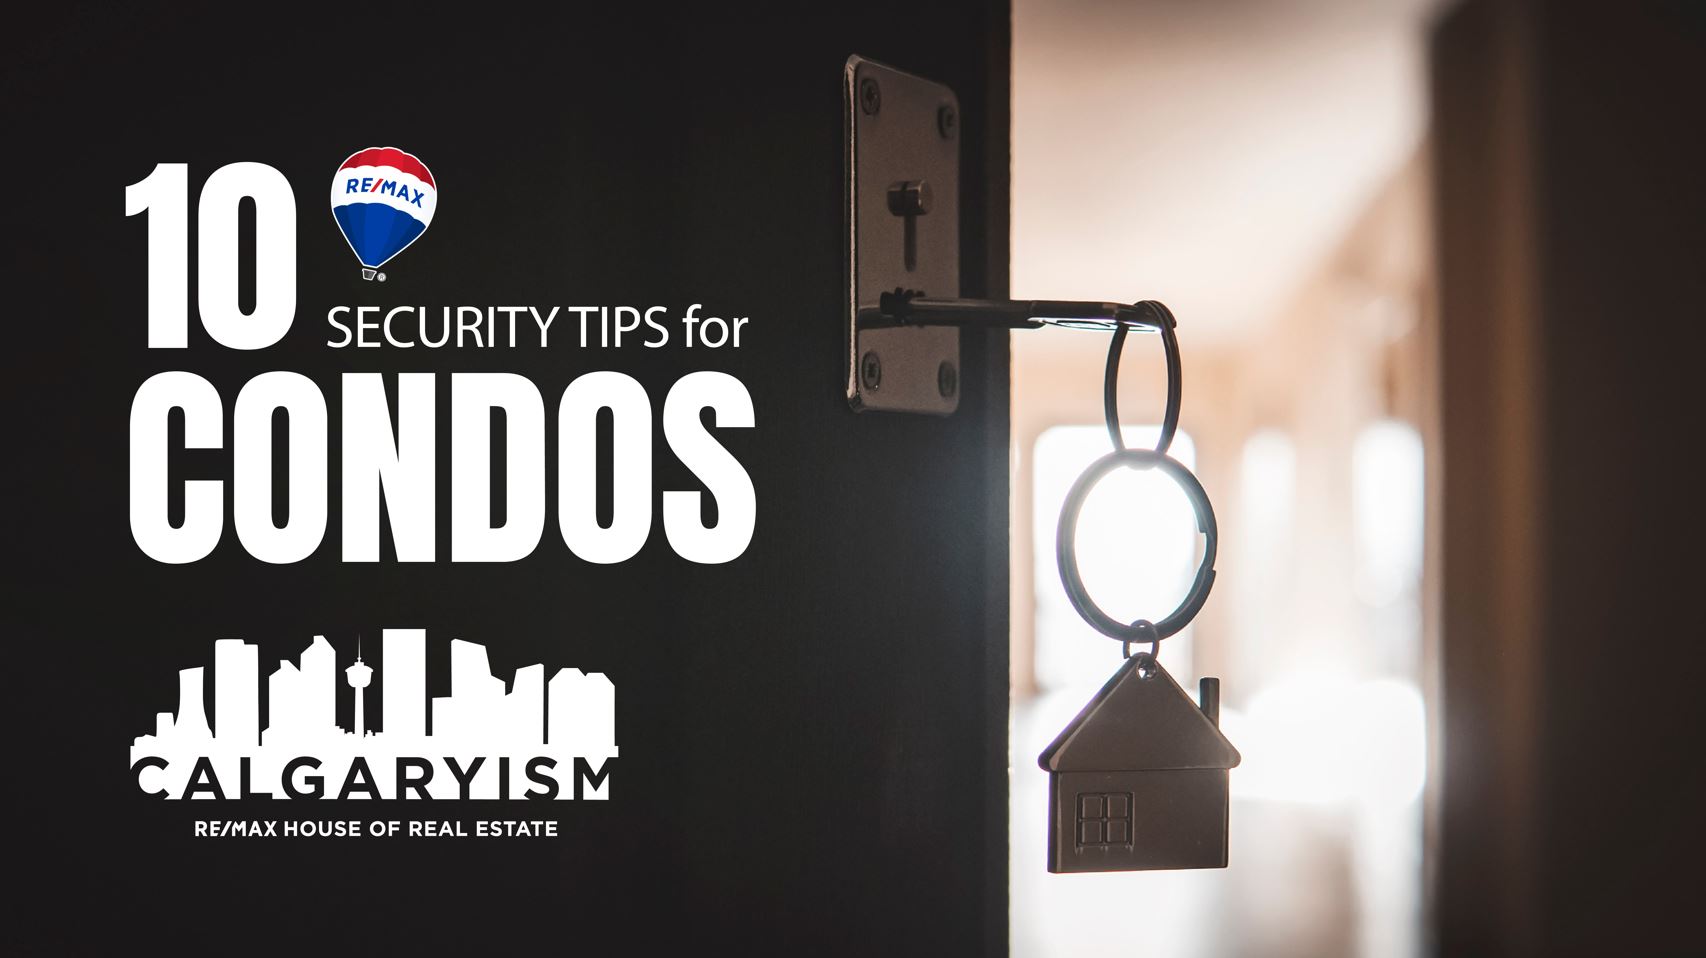 apartment security tips - how to stay safe when living in a condo